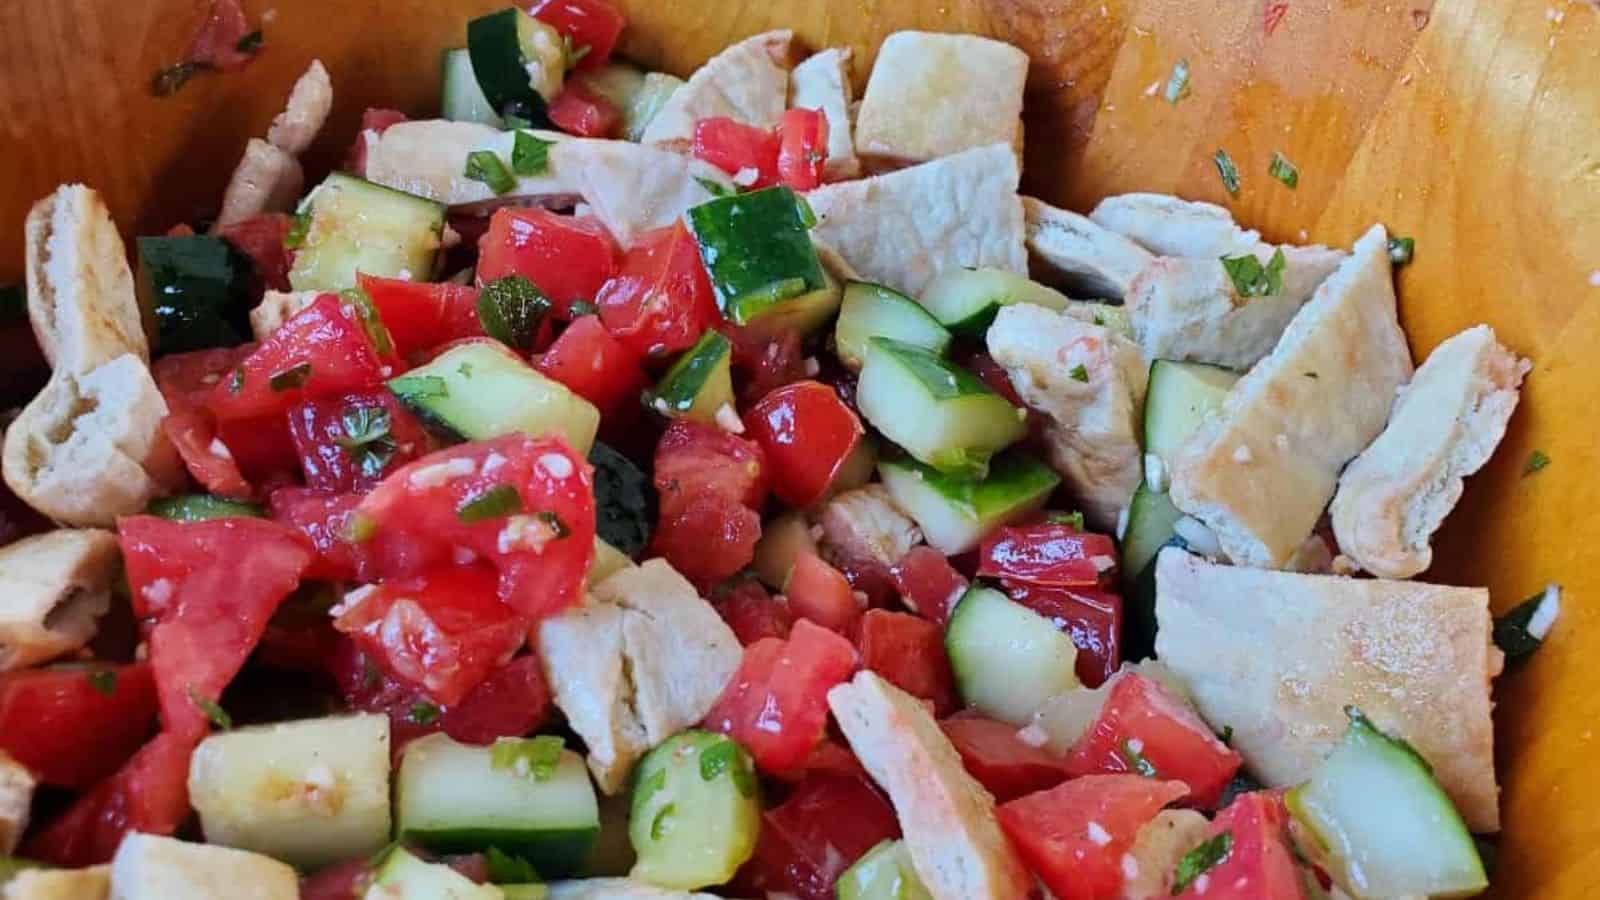 Image shows a Mediterranean Cucumber Tomato Salad in a wooden bowl closeup.